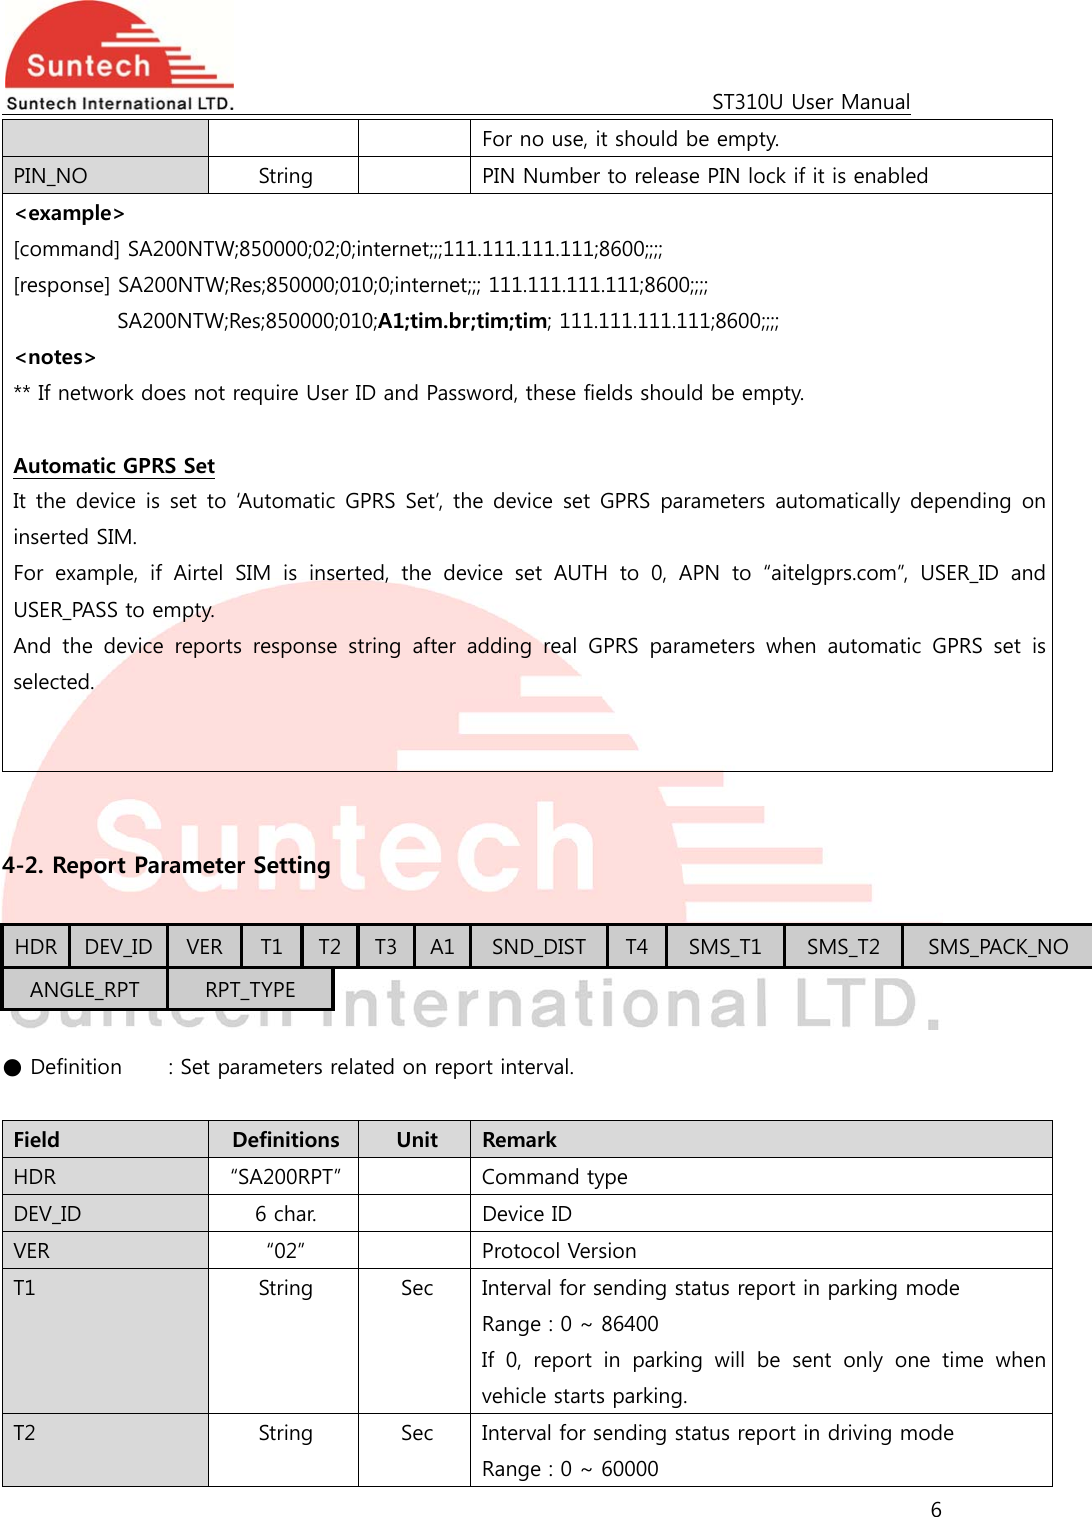                                                                                             ST310U User Manual 6  For no use, it should be empty. PIN_NO  String    PIN Number to release PIN lock if it is enabled &lt;example&gt; [command] SA200NTW;850000;02;0;internet;;;111.111.111.111;8600;;;;   [response] SA200NTW;Res;850000;010;0;internet;;; 111.111.111.111;8600;;;; SA200NTW;Res;850000;010;A1;tim.br;tim;tim; 111.111.111.111;8600;;;; &lt;notes&gt; ** If network does not require User ID and Password, these fields should be empty.  Automatic GPRS Set It the device  is  set  to ‘Automatic  GPRS Set’, the device  set  GPRS parameters automatically depending  on inserted SIM. For  example,  if  Airtel  SIM  is  inserted,  the  device  set  AUTH  to  0, APN to “aitelgprs.com”, USER_ID and USER_PASS to empty. And  the  device  reports  response  string after adding real GPRS parameters  when  automatic  GPRS  set  is selected.     4-2. Report Parameter Setting  HDR  DEV_ID  VER T1  T2  T3 A1 SND_DIST  T4 SMS_T1  SMS_T2  SMS_PACK_NO ANGLE_RPT  RPT_TYPE  ● Definition   : Set parameters related on report interval.  Field  Definitions  Unit  Remark HDR  “SA200RPT”    Command type DEV_ID  6 char.    Device ID VER  “02”    Protocol Version T1  String  Sec  Interval for sending status report in parking mode Range : 0 ~ 86400 If  0,  report  in  parking  will  be  sent  only  one  time  when vehicle starts parking. T2  String  Sec  Interval for sending status report in driving mode Range : 0 ~ 60000 